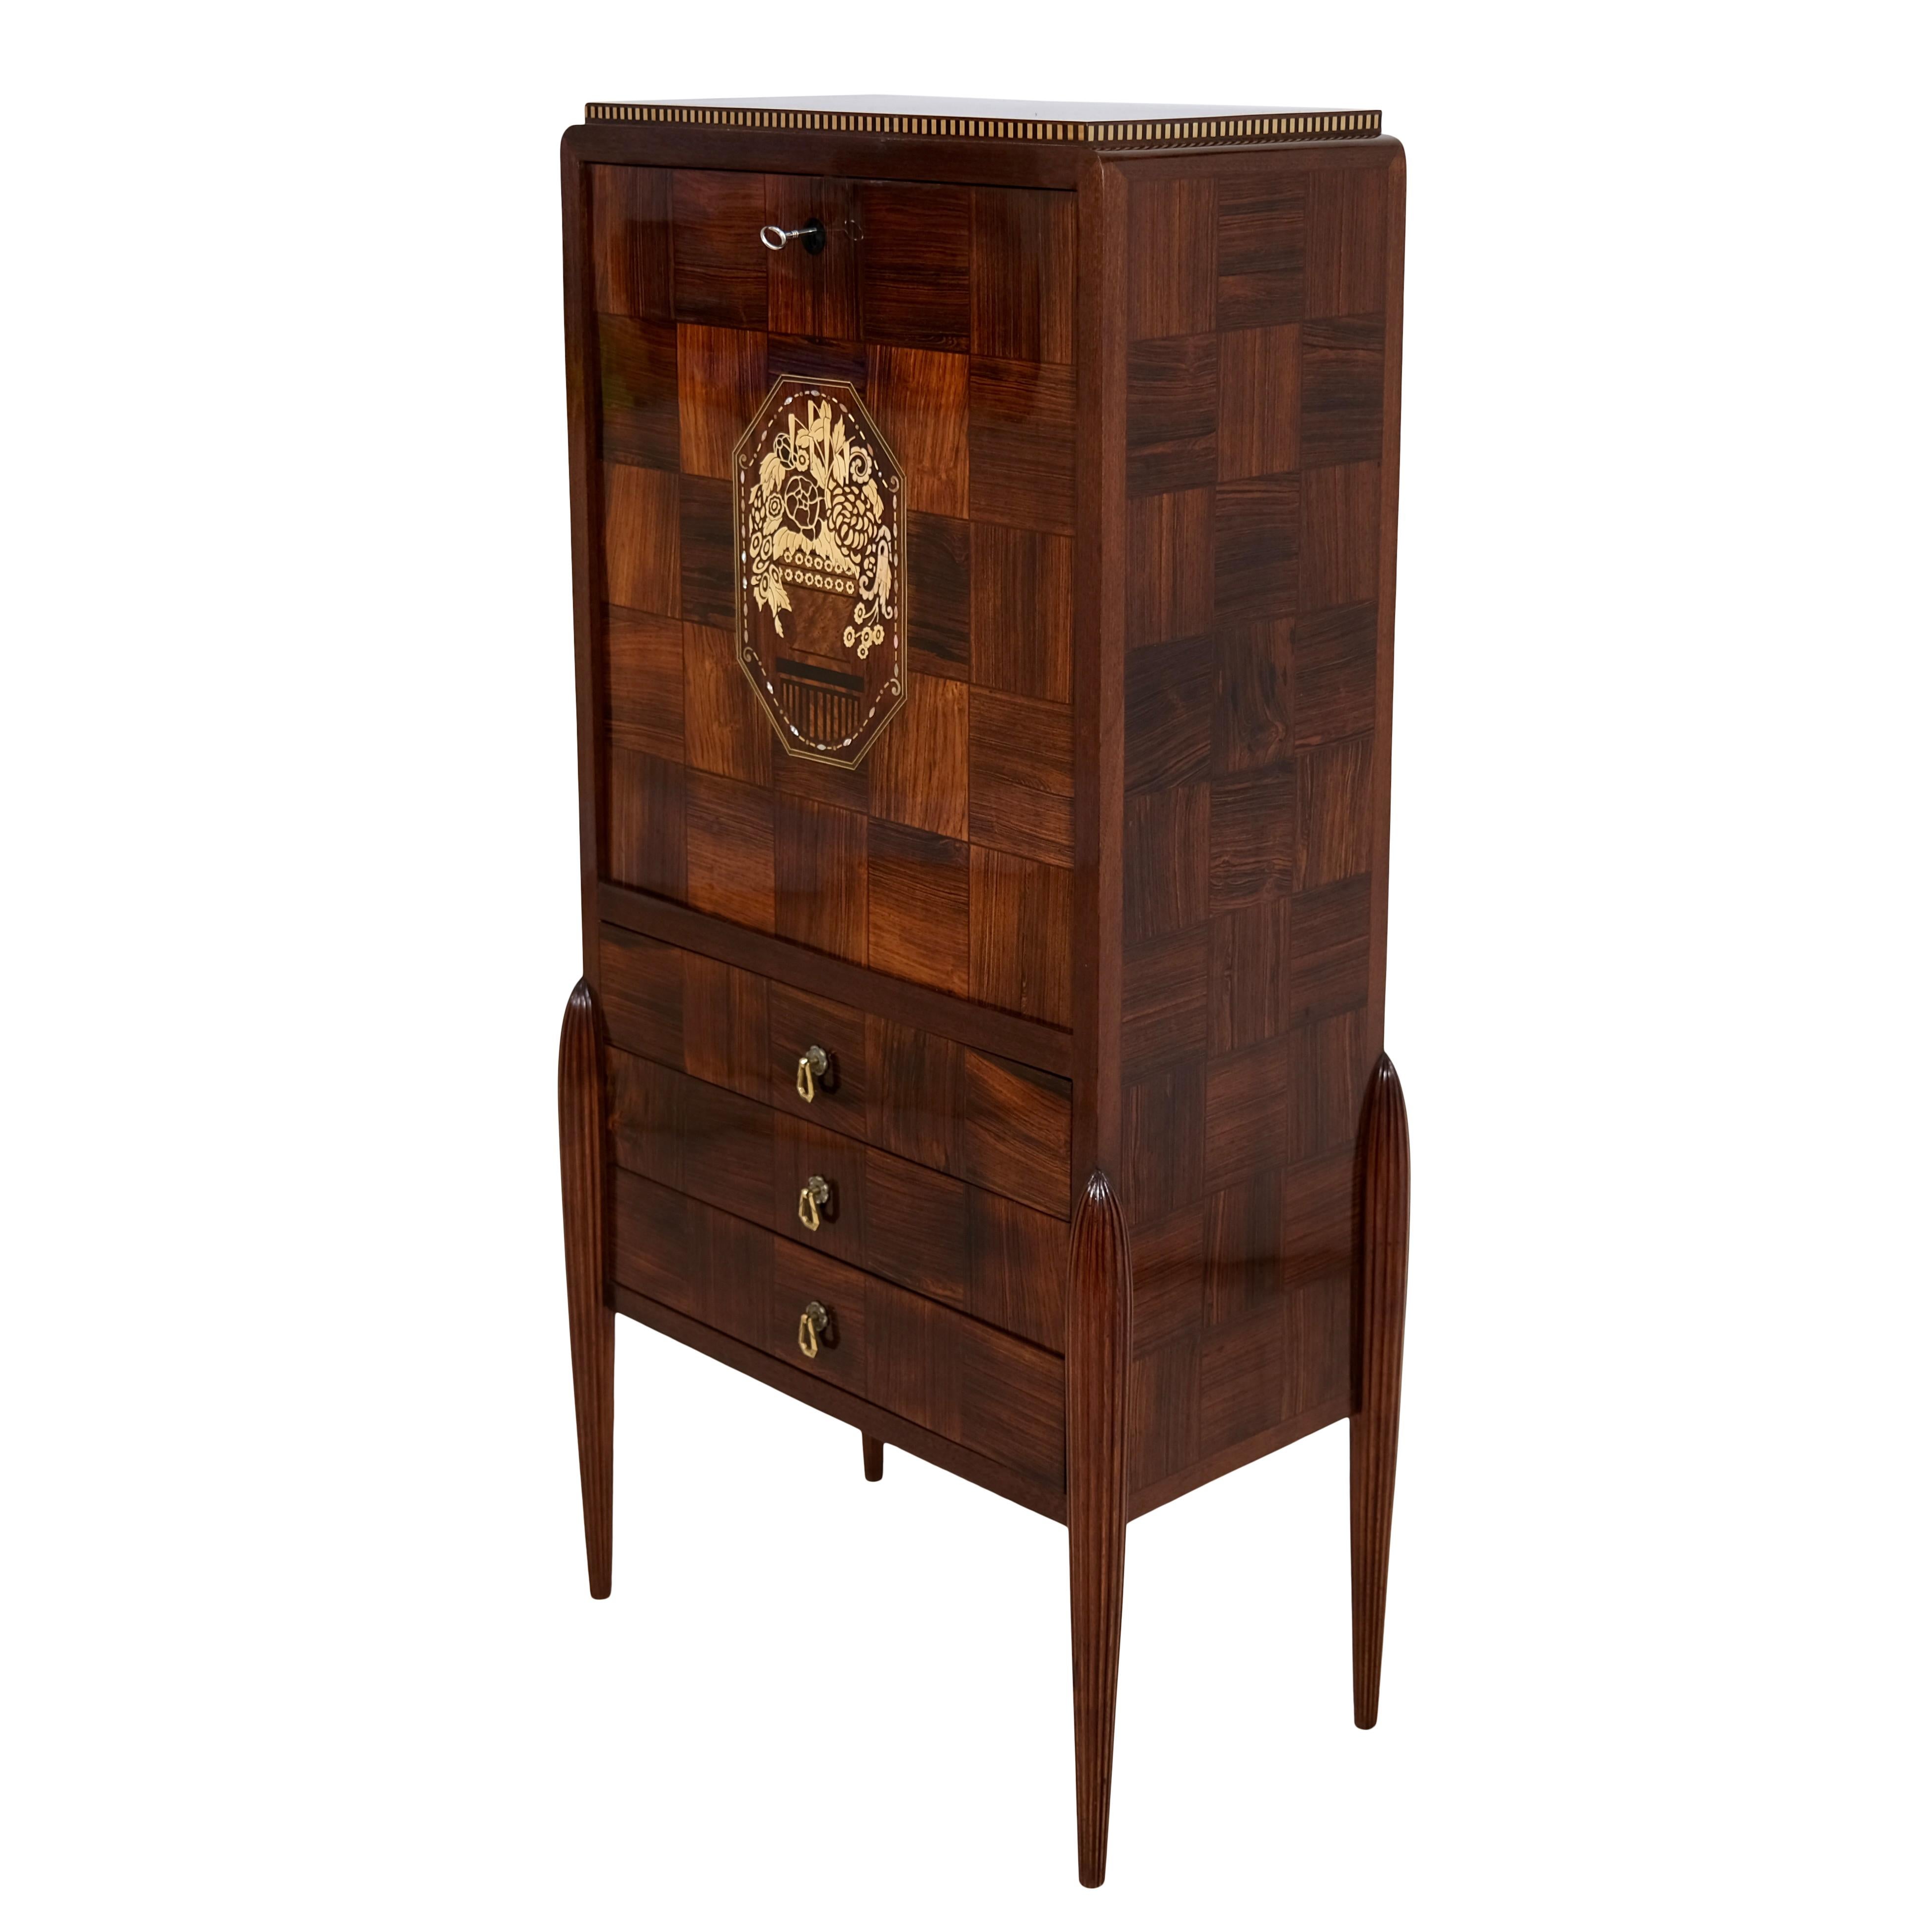 Early French Art Deco Secretaire Desk with Marquetry and Inlays For Sale 5